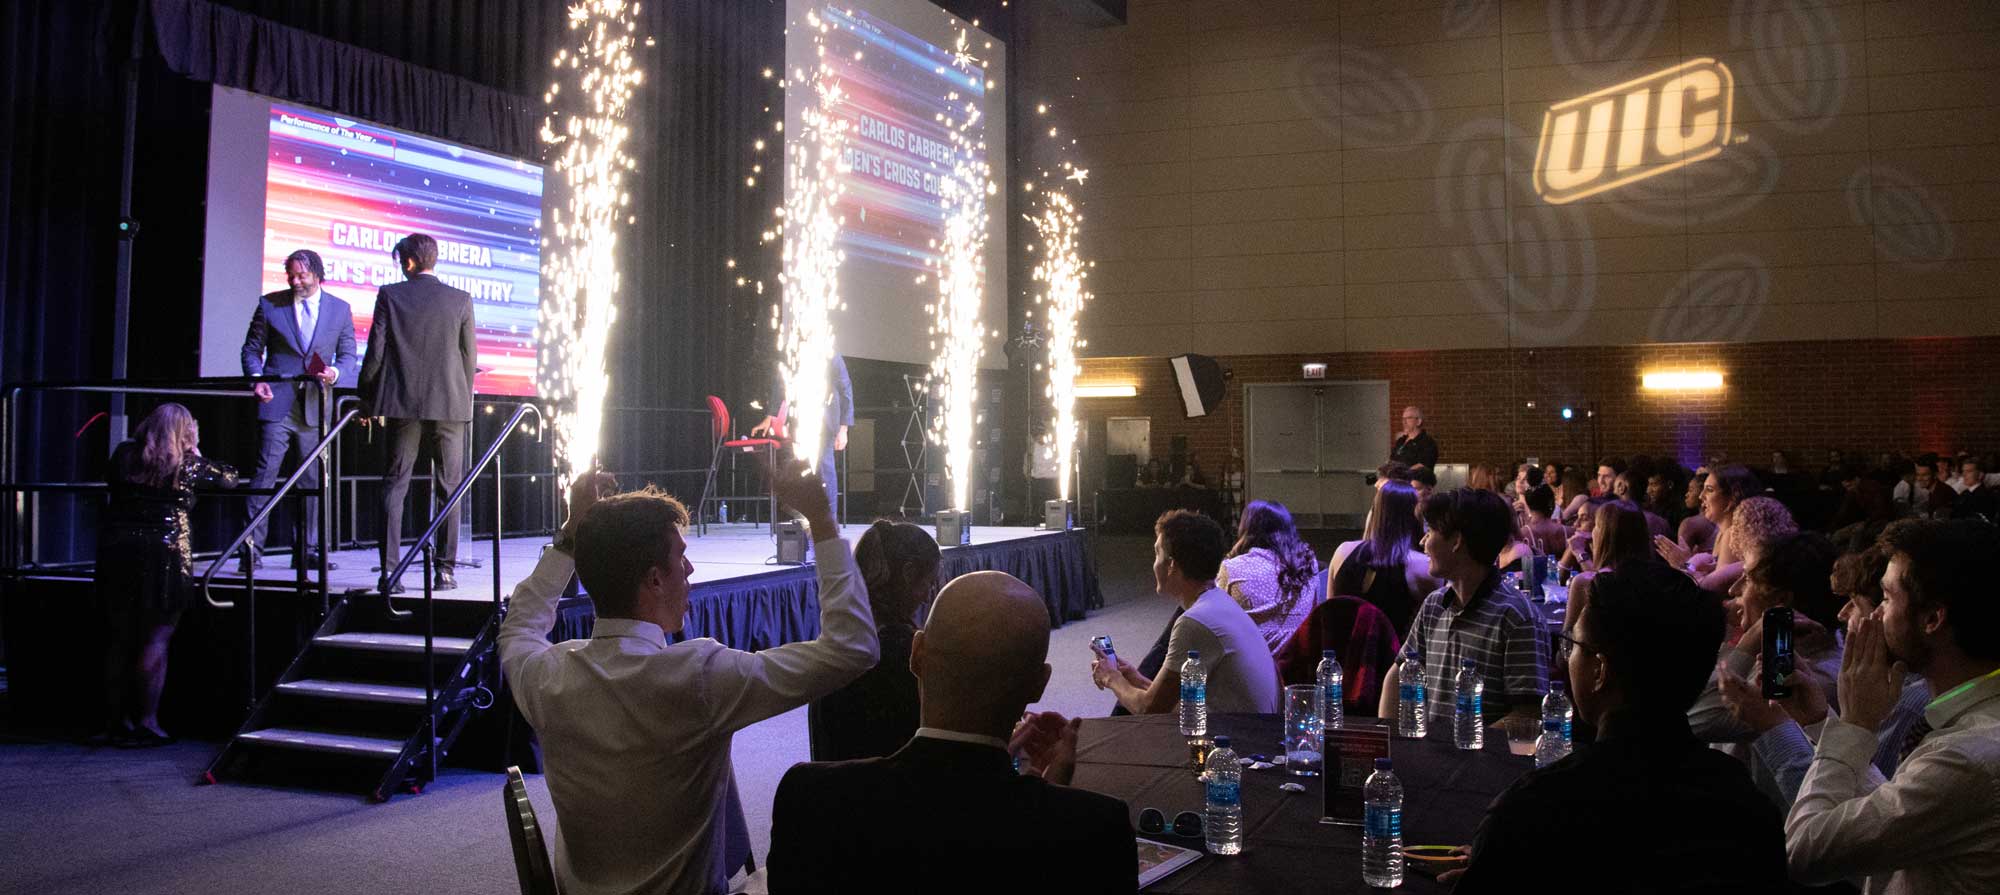 Two individuals on a stage with pyrotechnic effects as an audience watches at an indoor event.